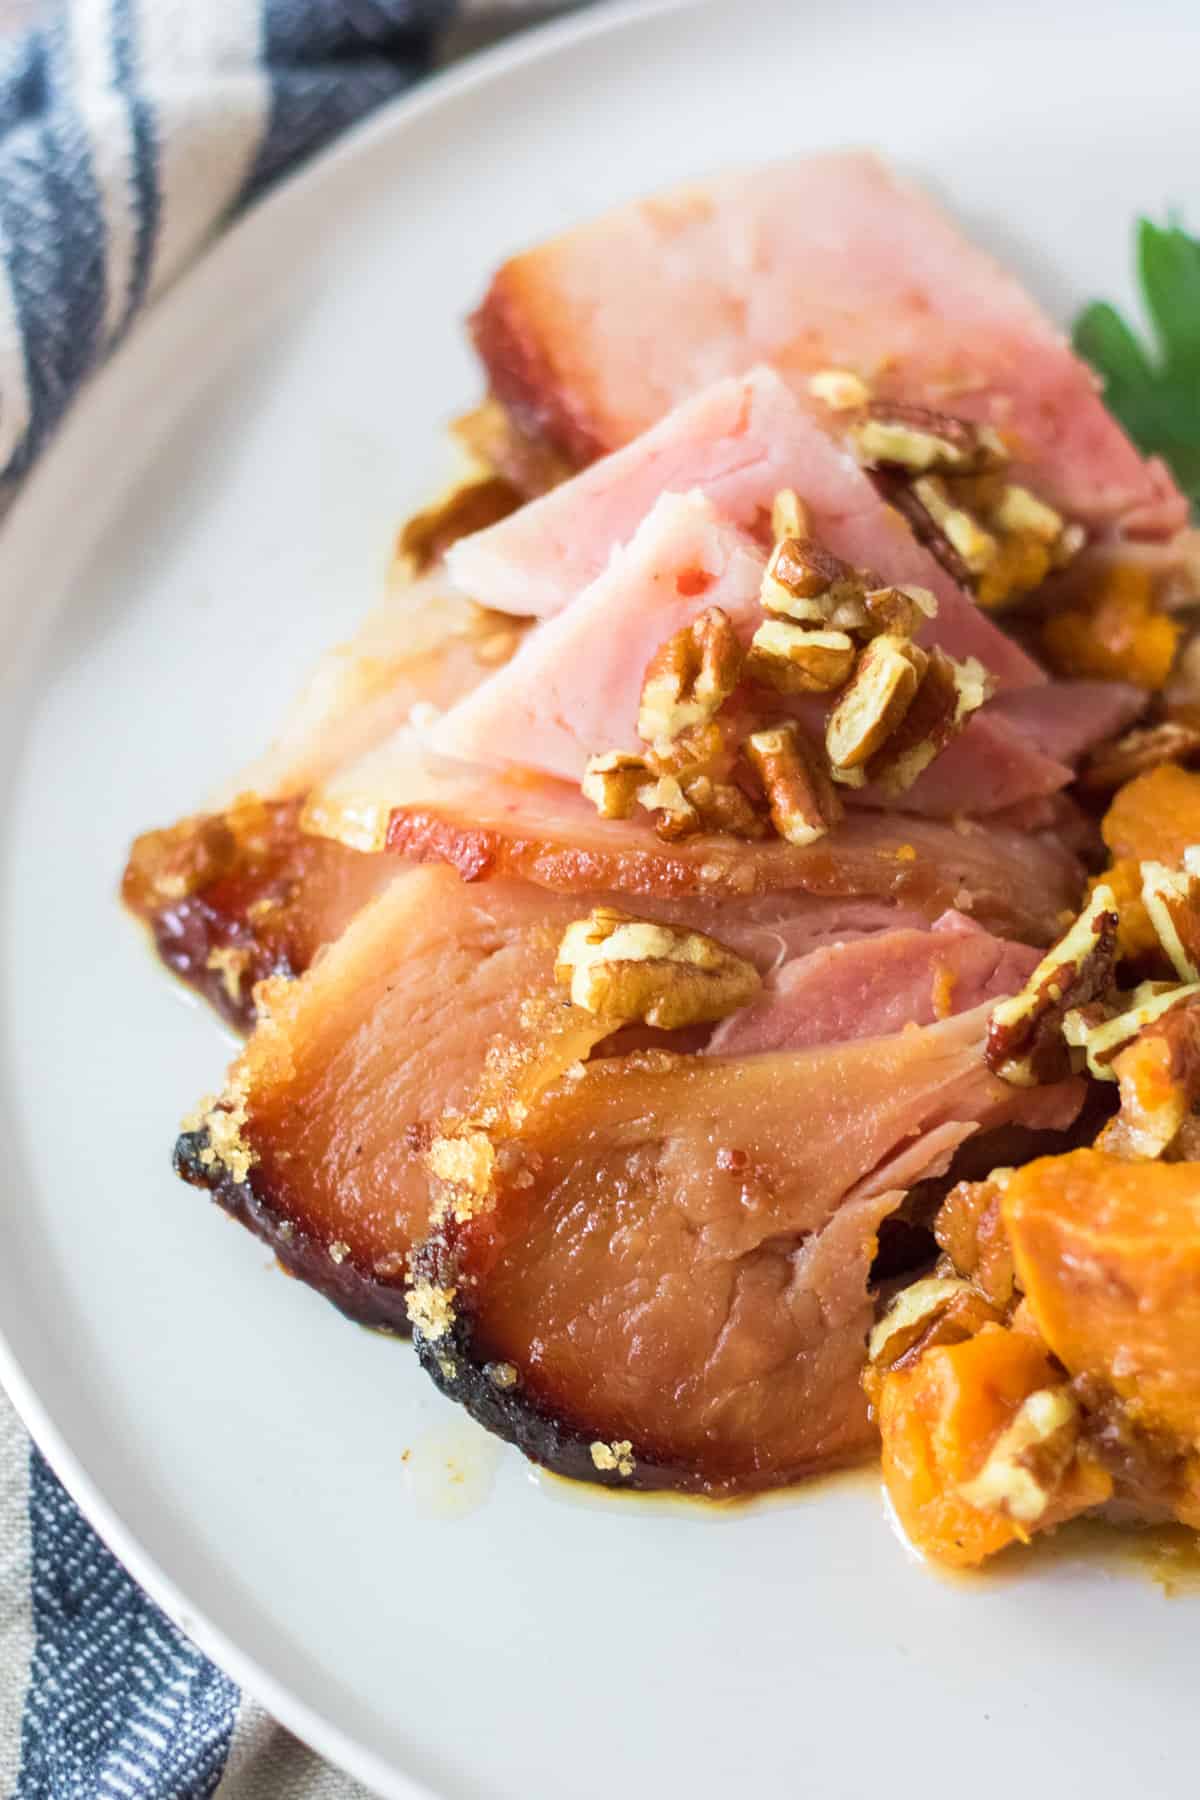 Slices of glazed spiral ham topped with pecans on a white plate with sweet potatoes next to them.